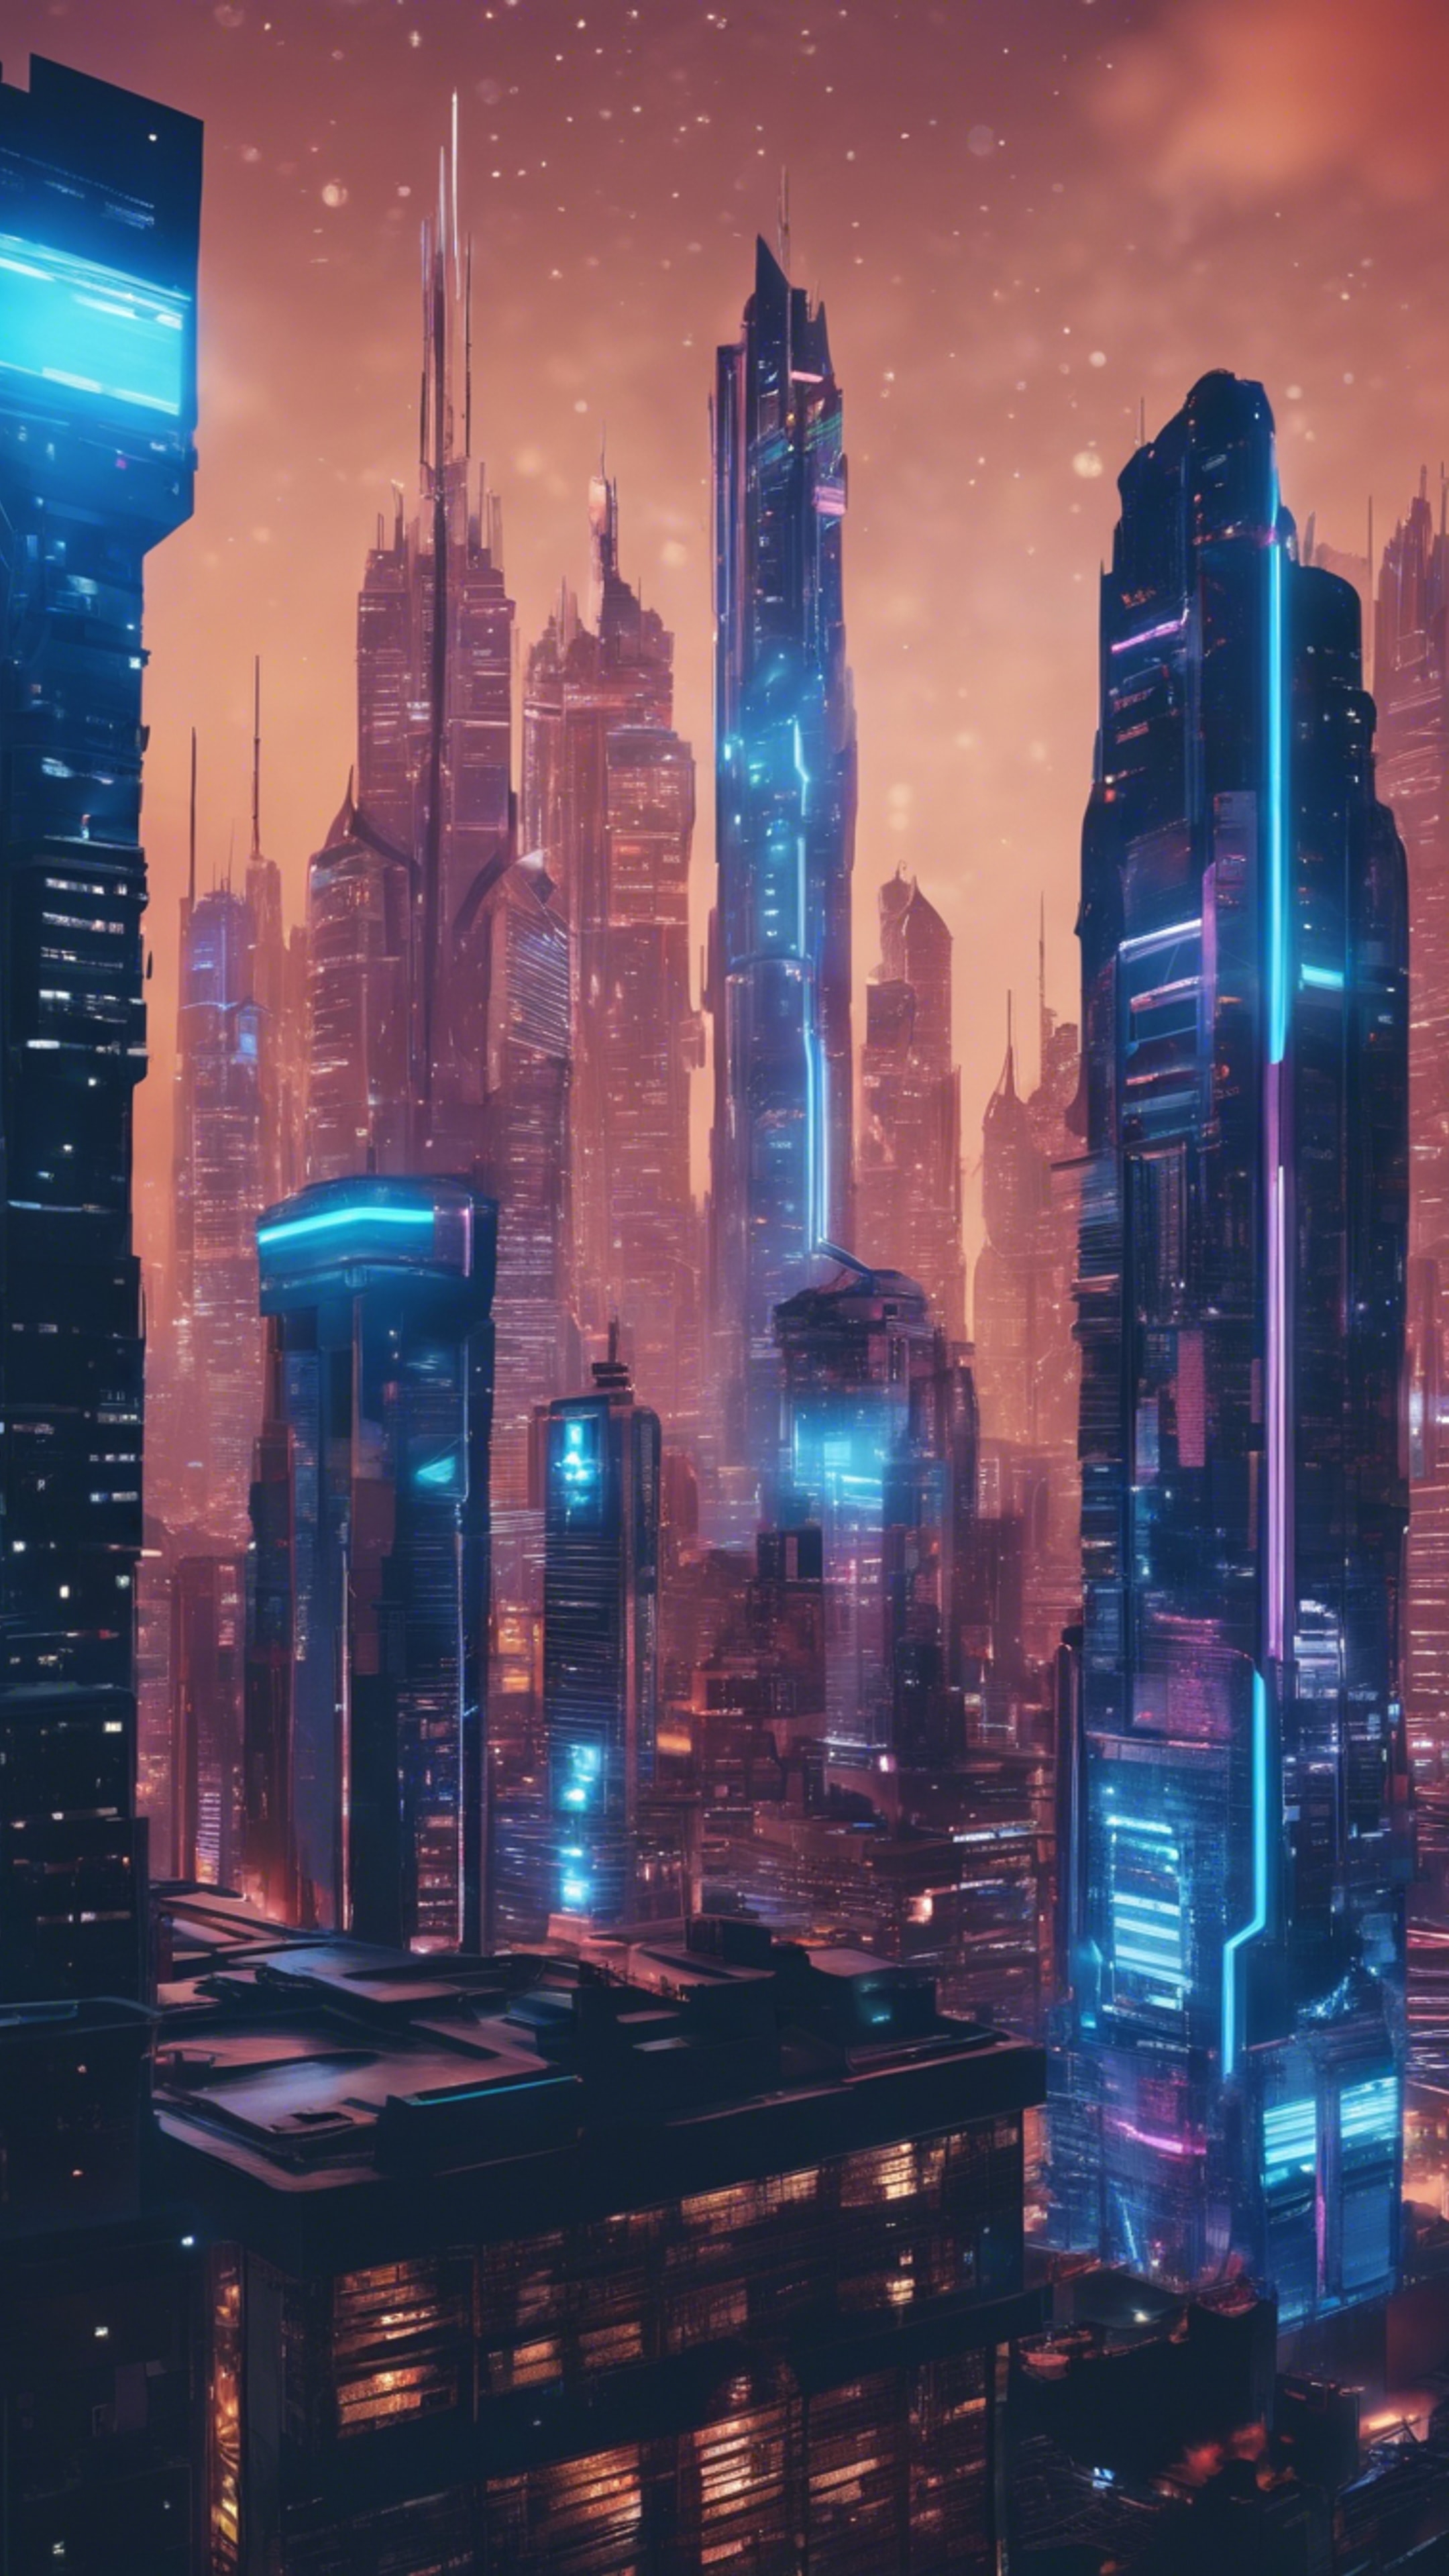 A futuristic city glowing with vibrant neon-blue lights and skyscrapers piercing the night sky.壁紙[2f3a3bdee3e14a4e9359]